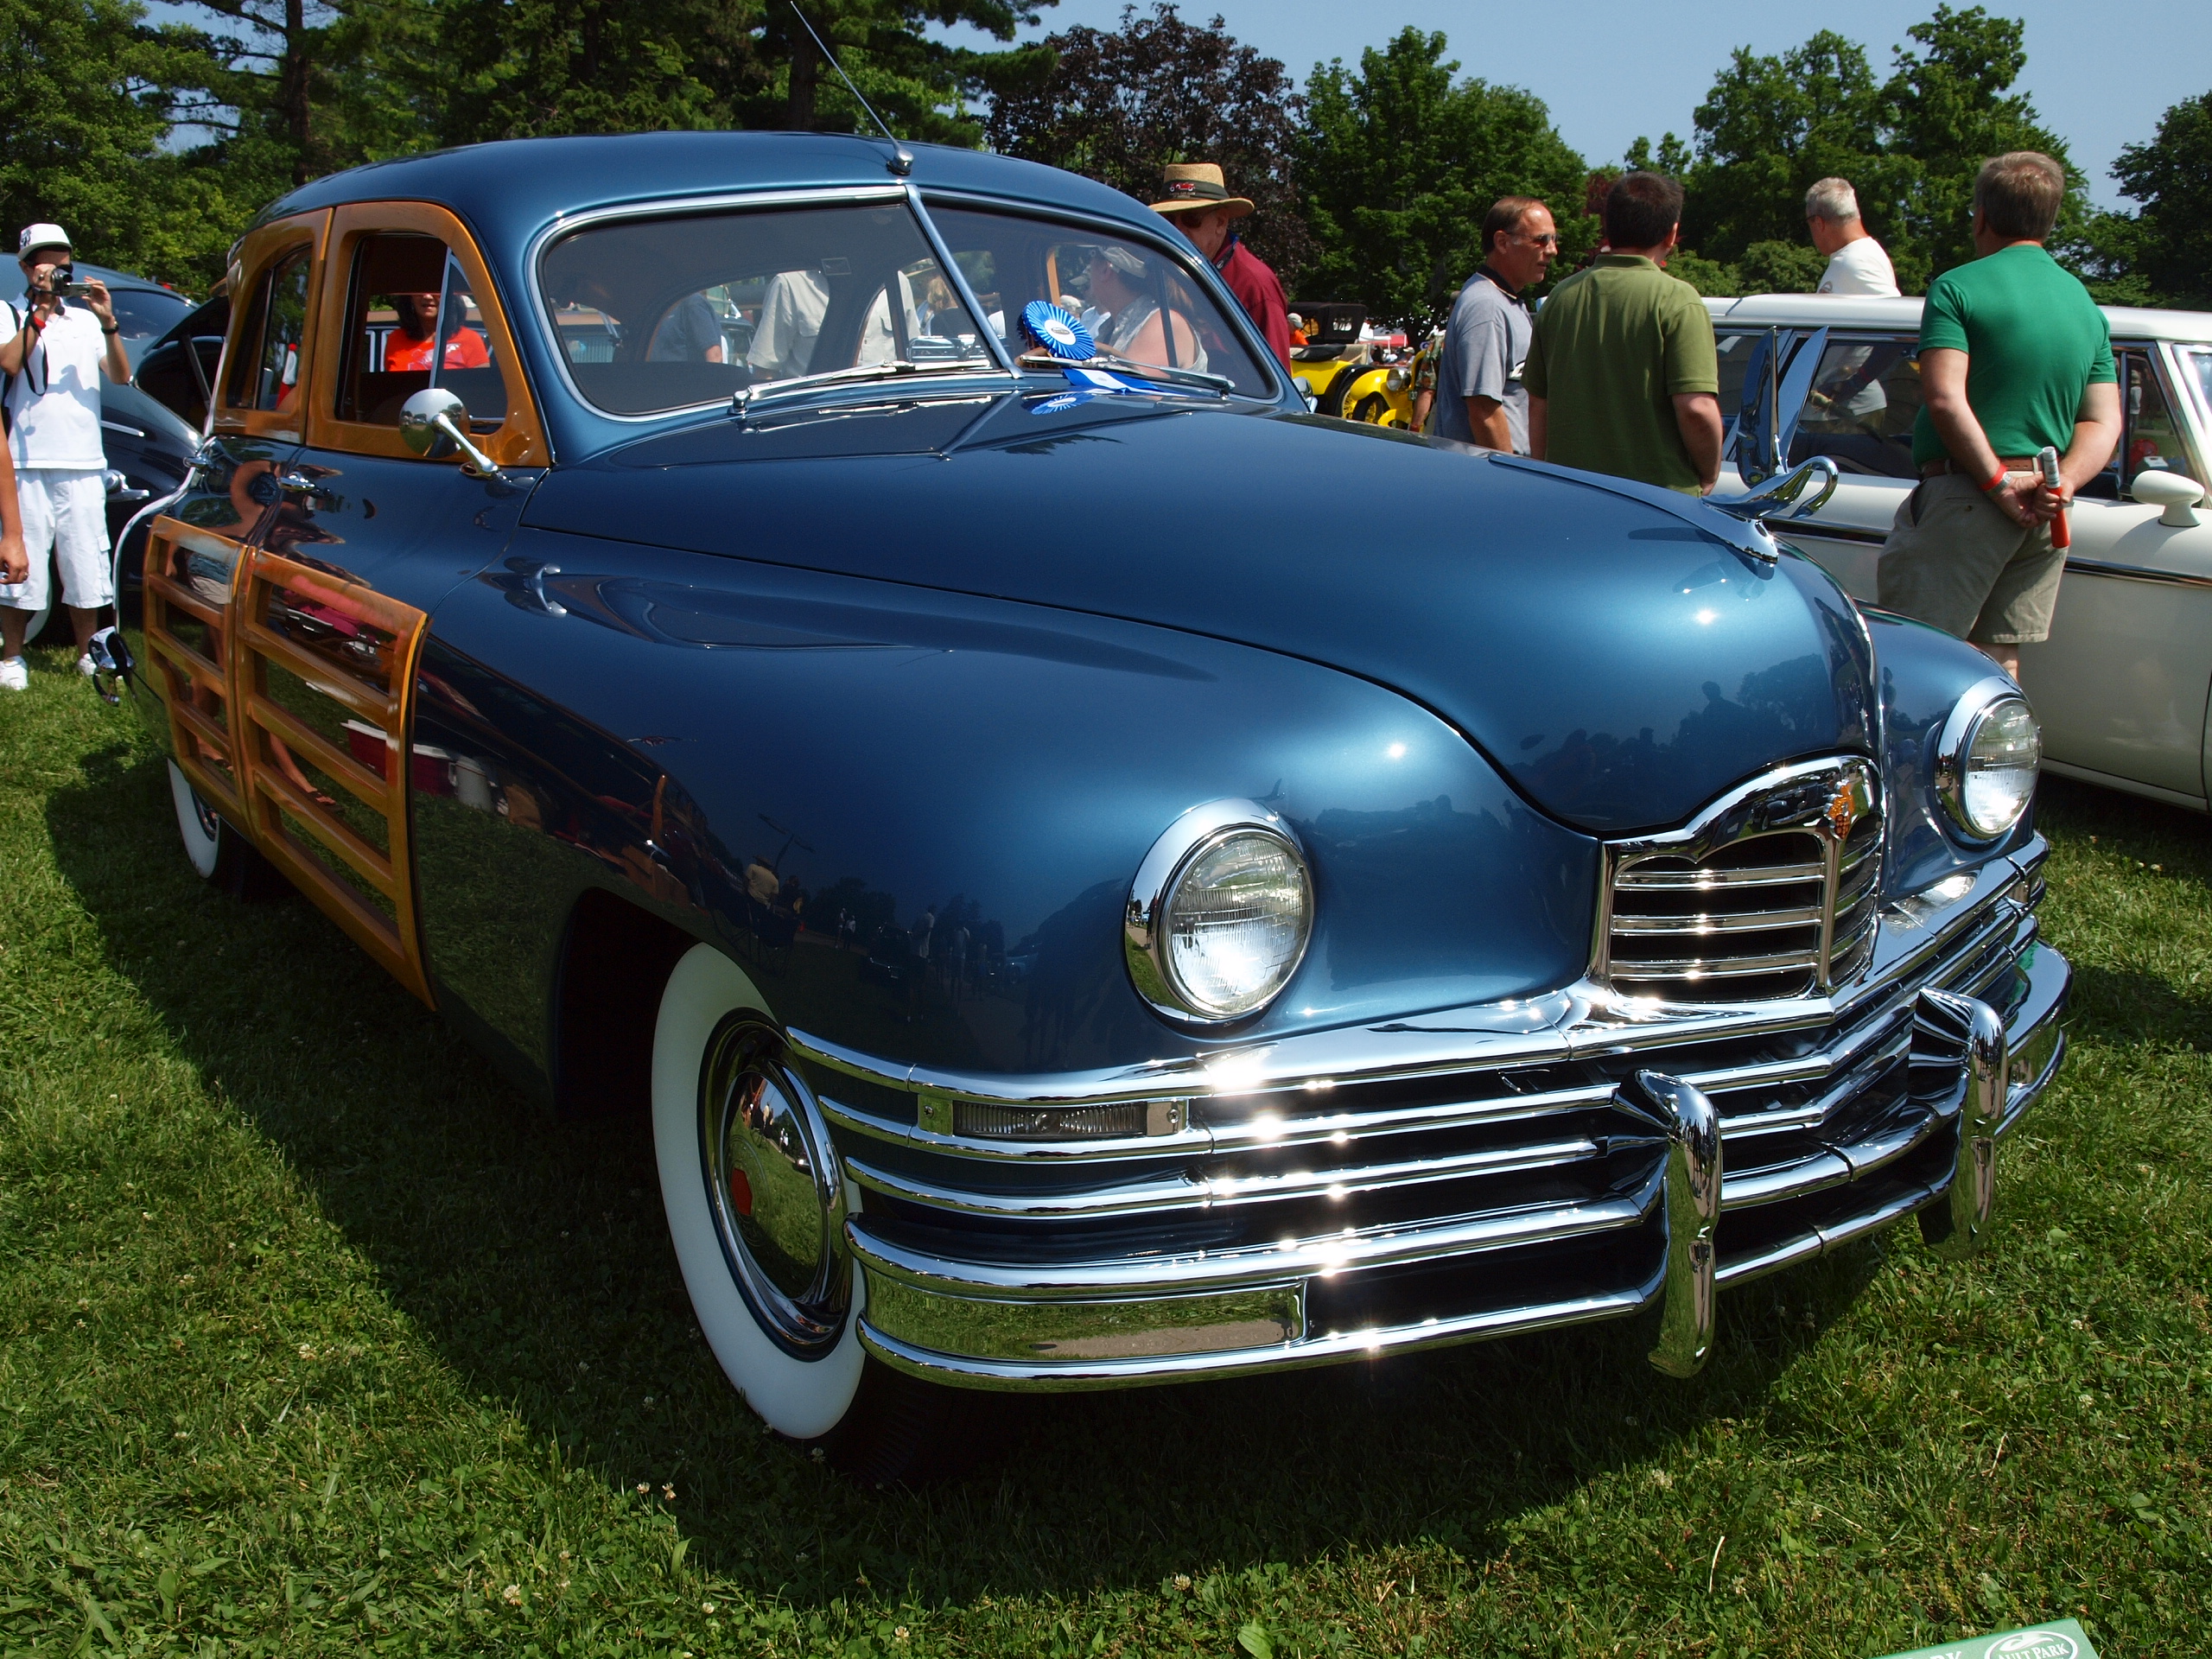 1950 Packard Eight Station Sedan Boldride.com - Pictures, Wallpapers